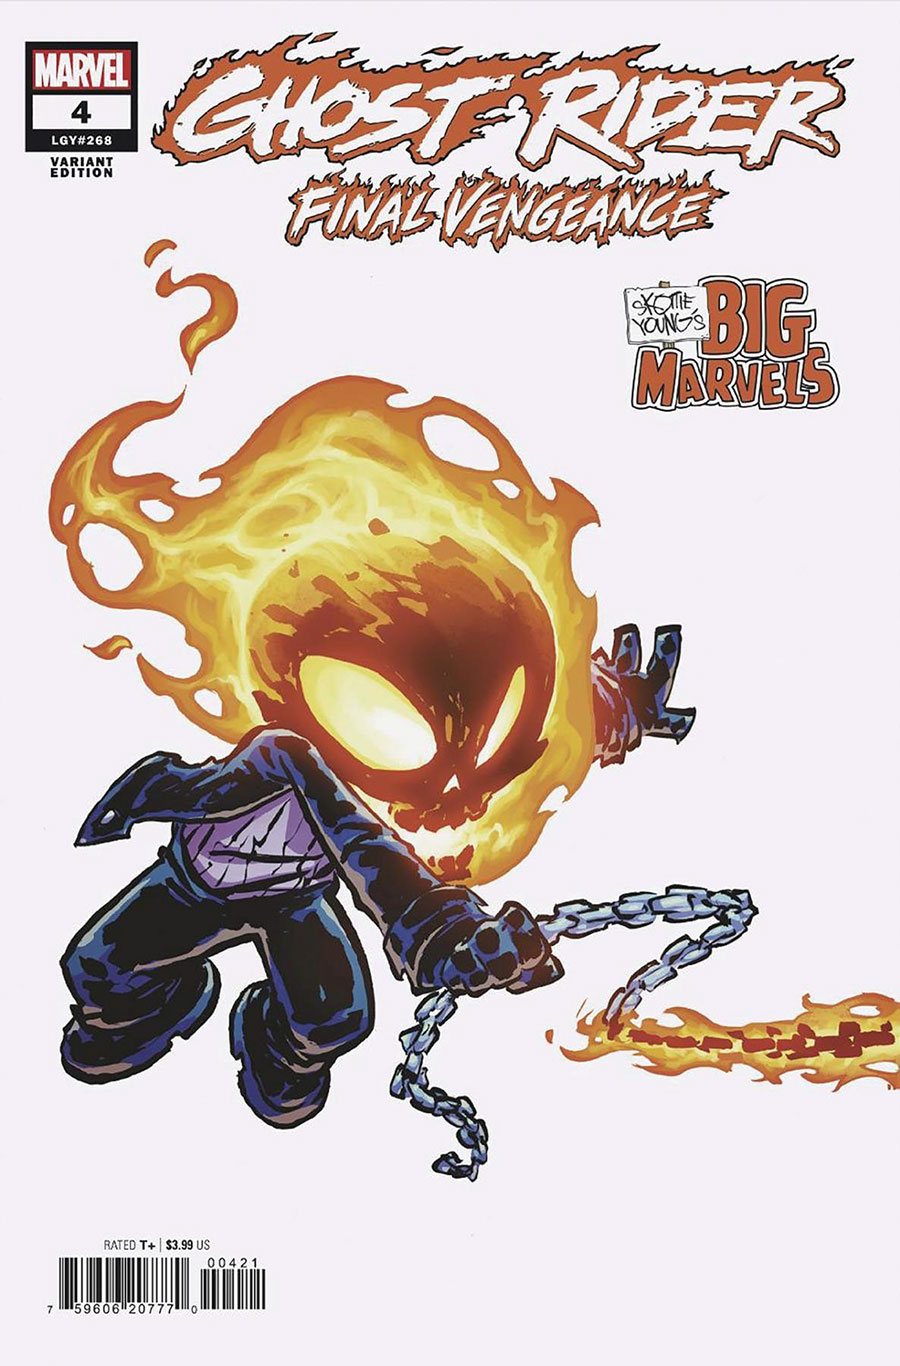 Ghost Rider Final Vengeance #4 Cover B Variant Skottie Youngs Big Marvels Cover